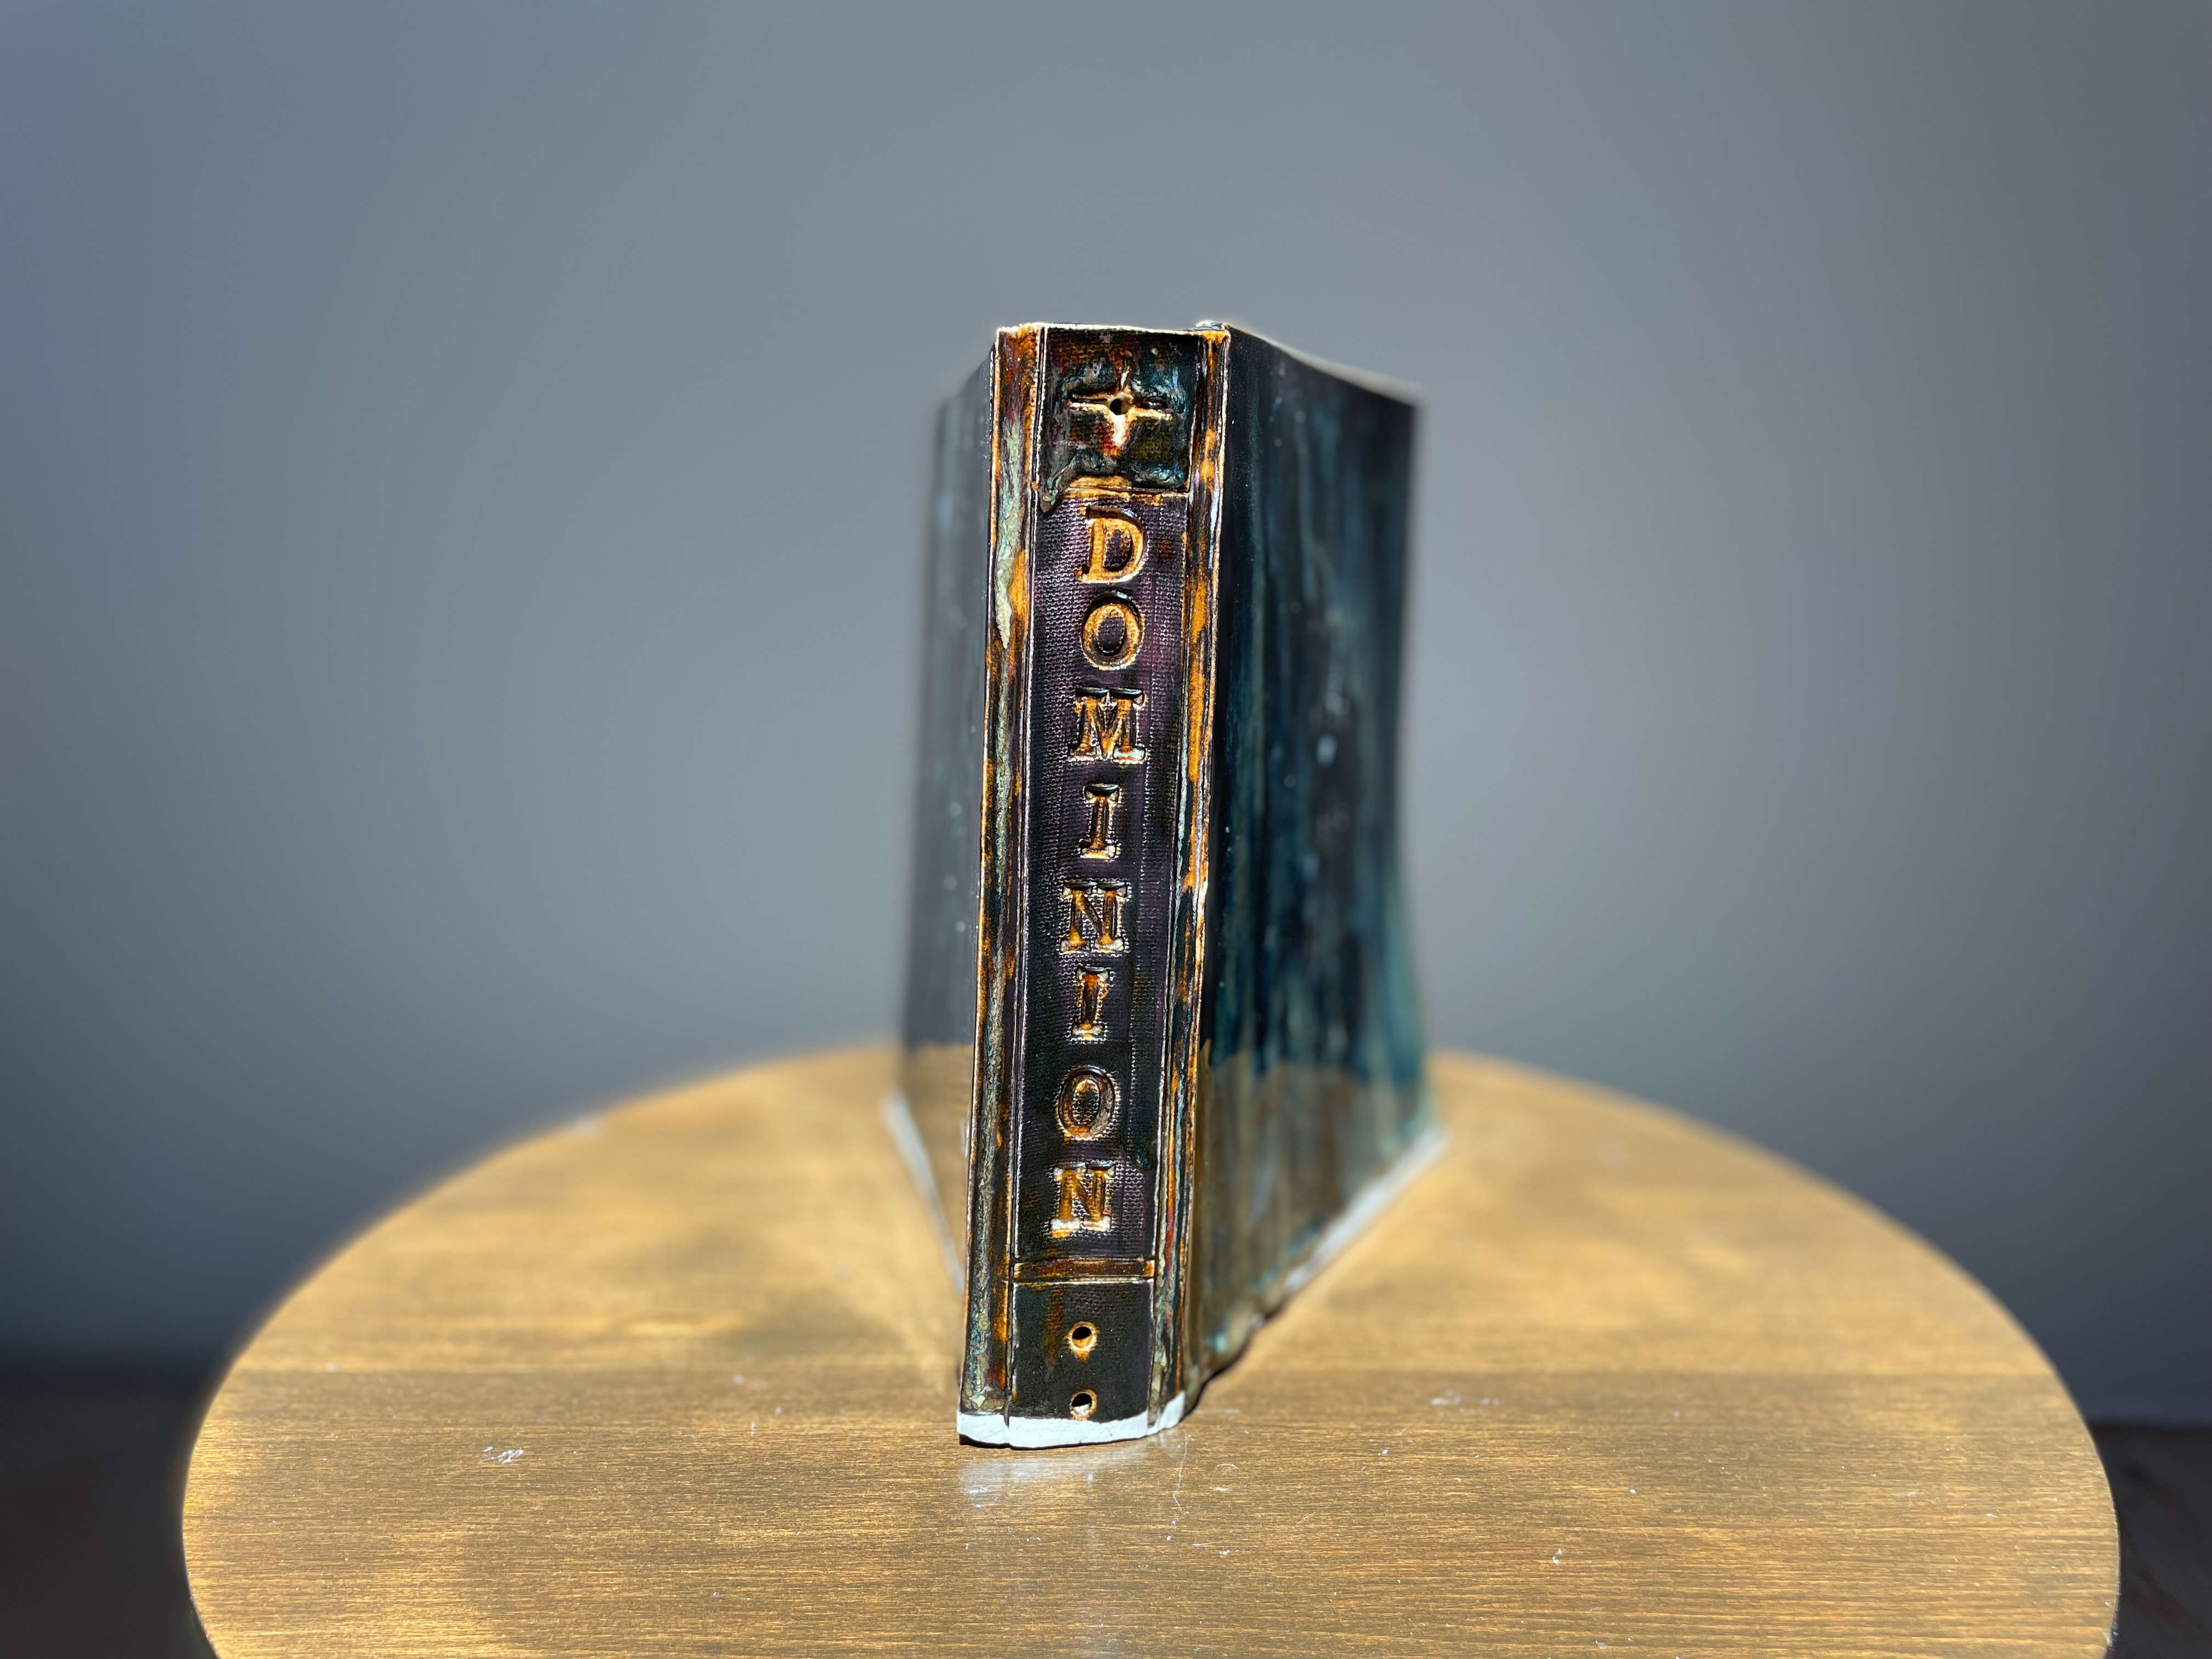 Dan Nuttall's ceramic sculpture of a book titled "Dominion" showing book spine 